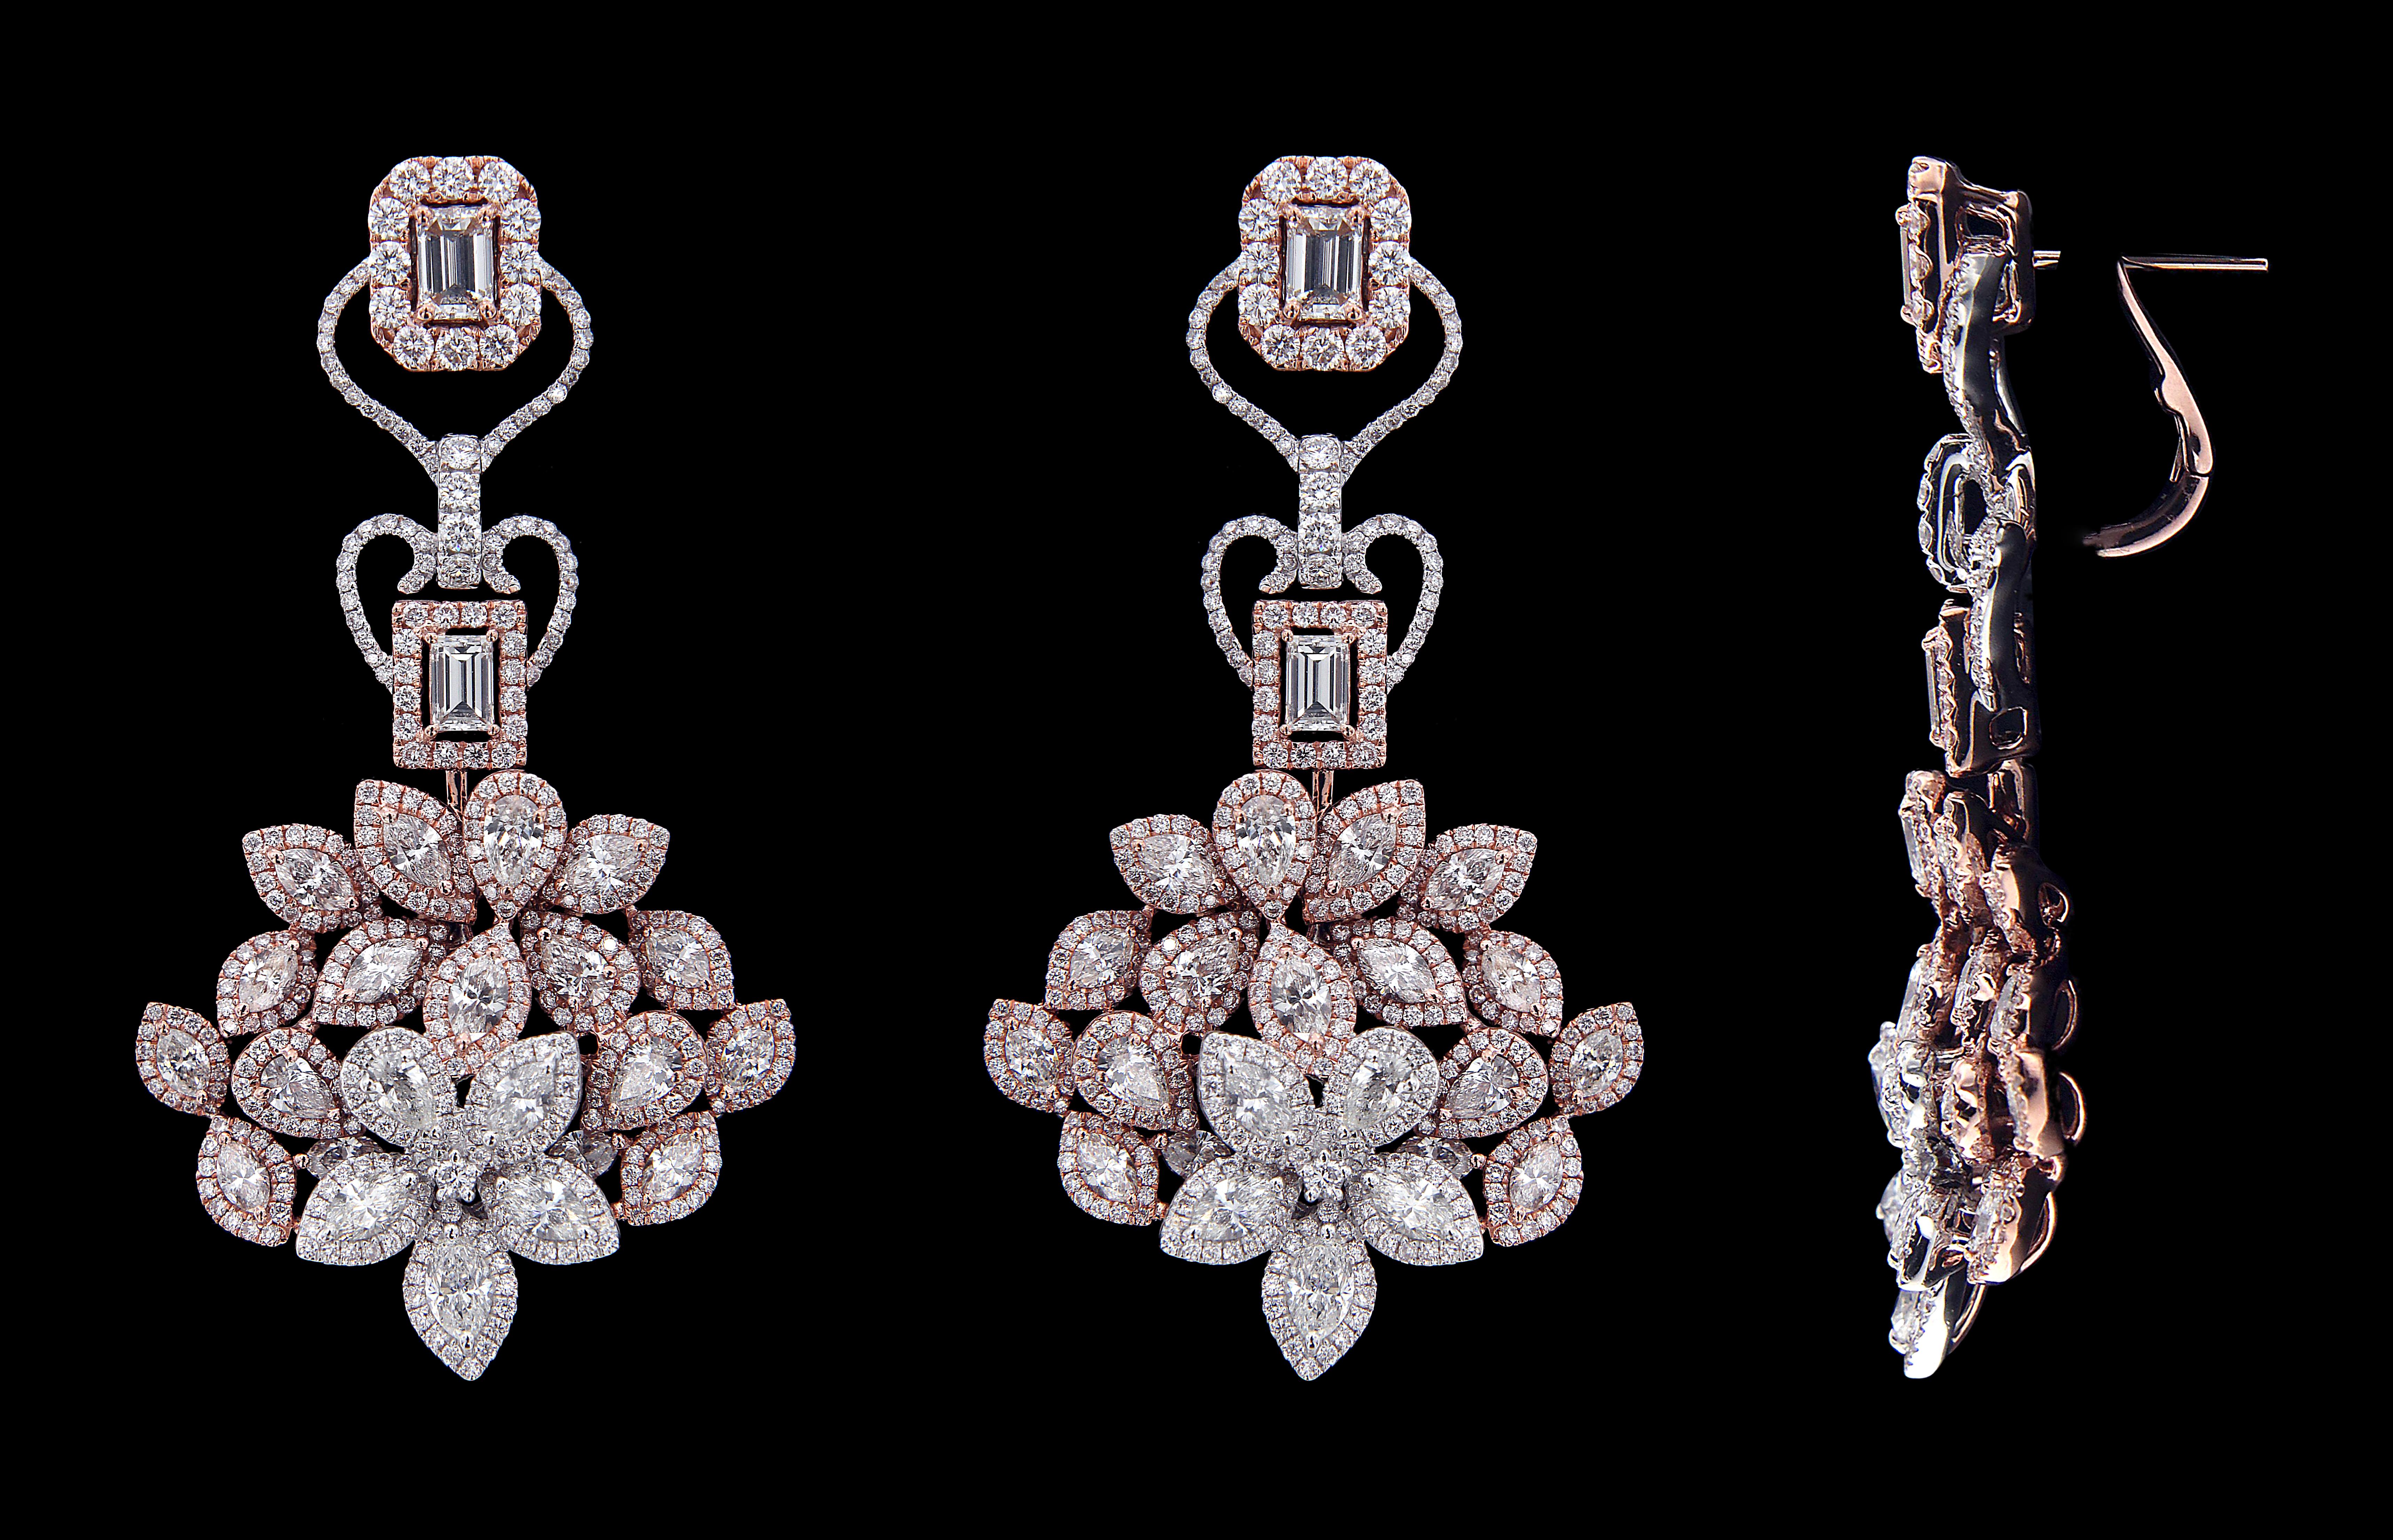 One Of A Kind 18 Karat Pink Gold and Diamond Earrings.

Diamonds of approximately 7.90 carats and mounted on 18 karats pink gold earrings. The earrings weigh approximately 25.23 grams.

Please note: The charges specified do not include any shipment,